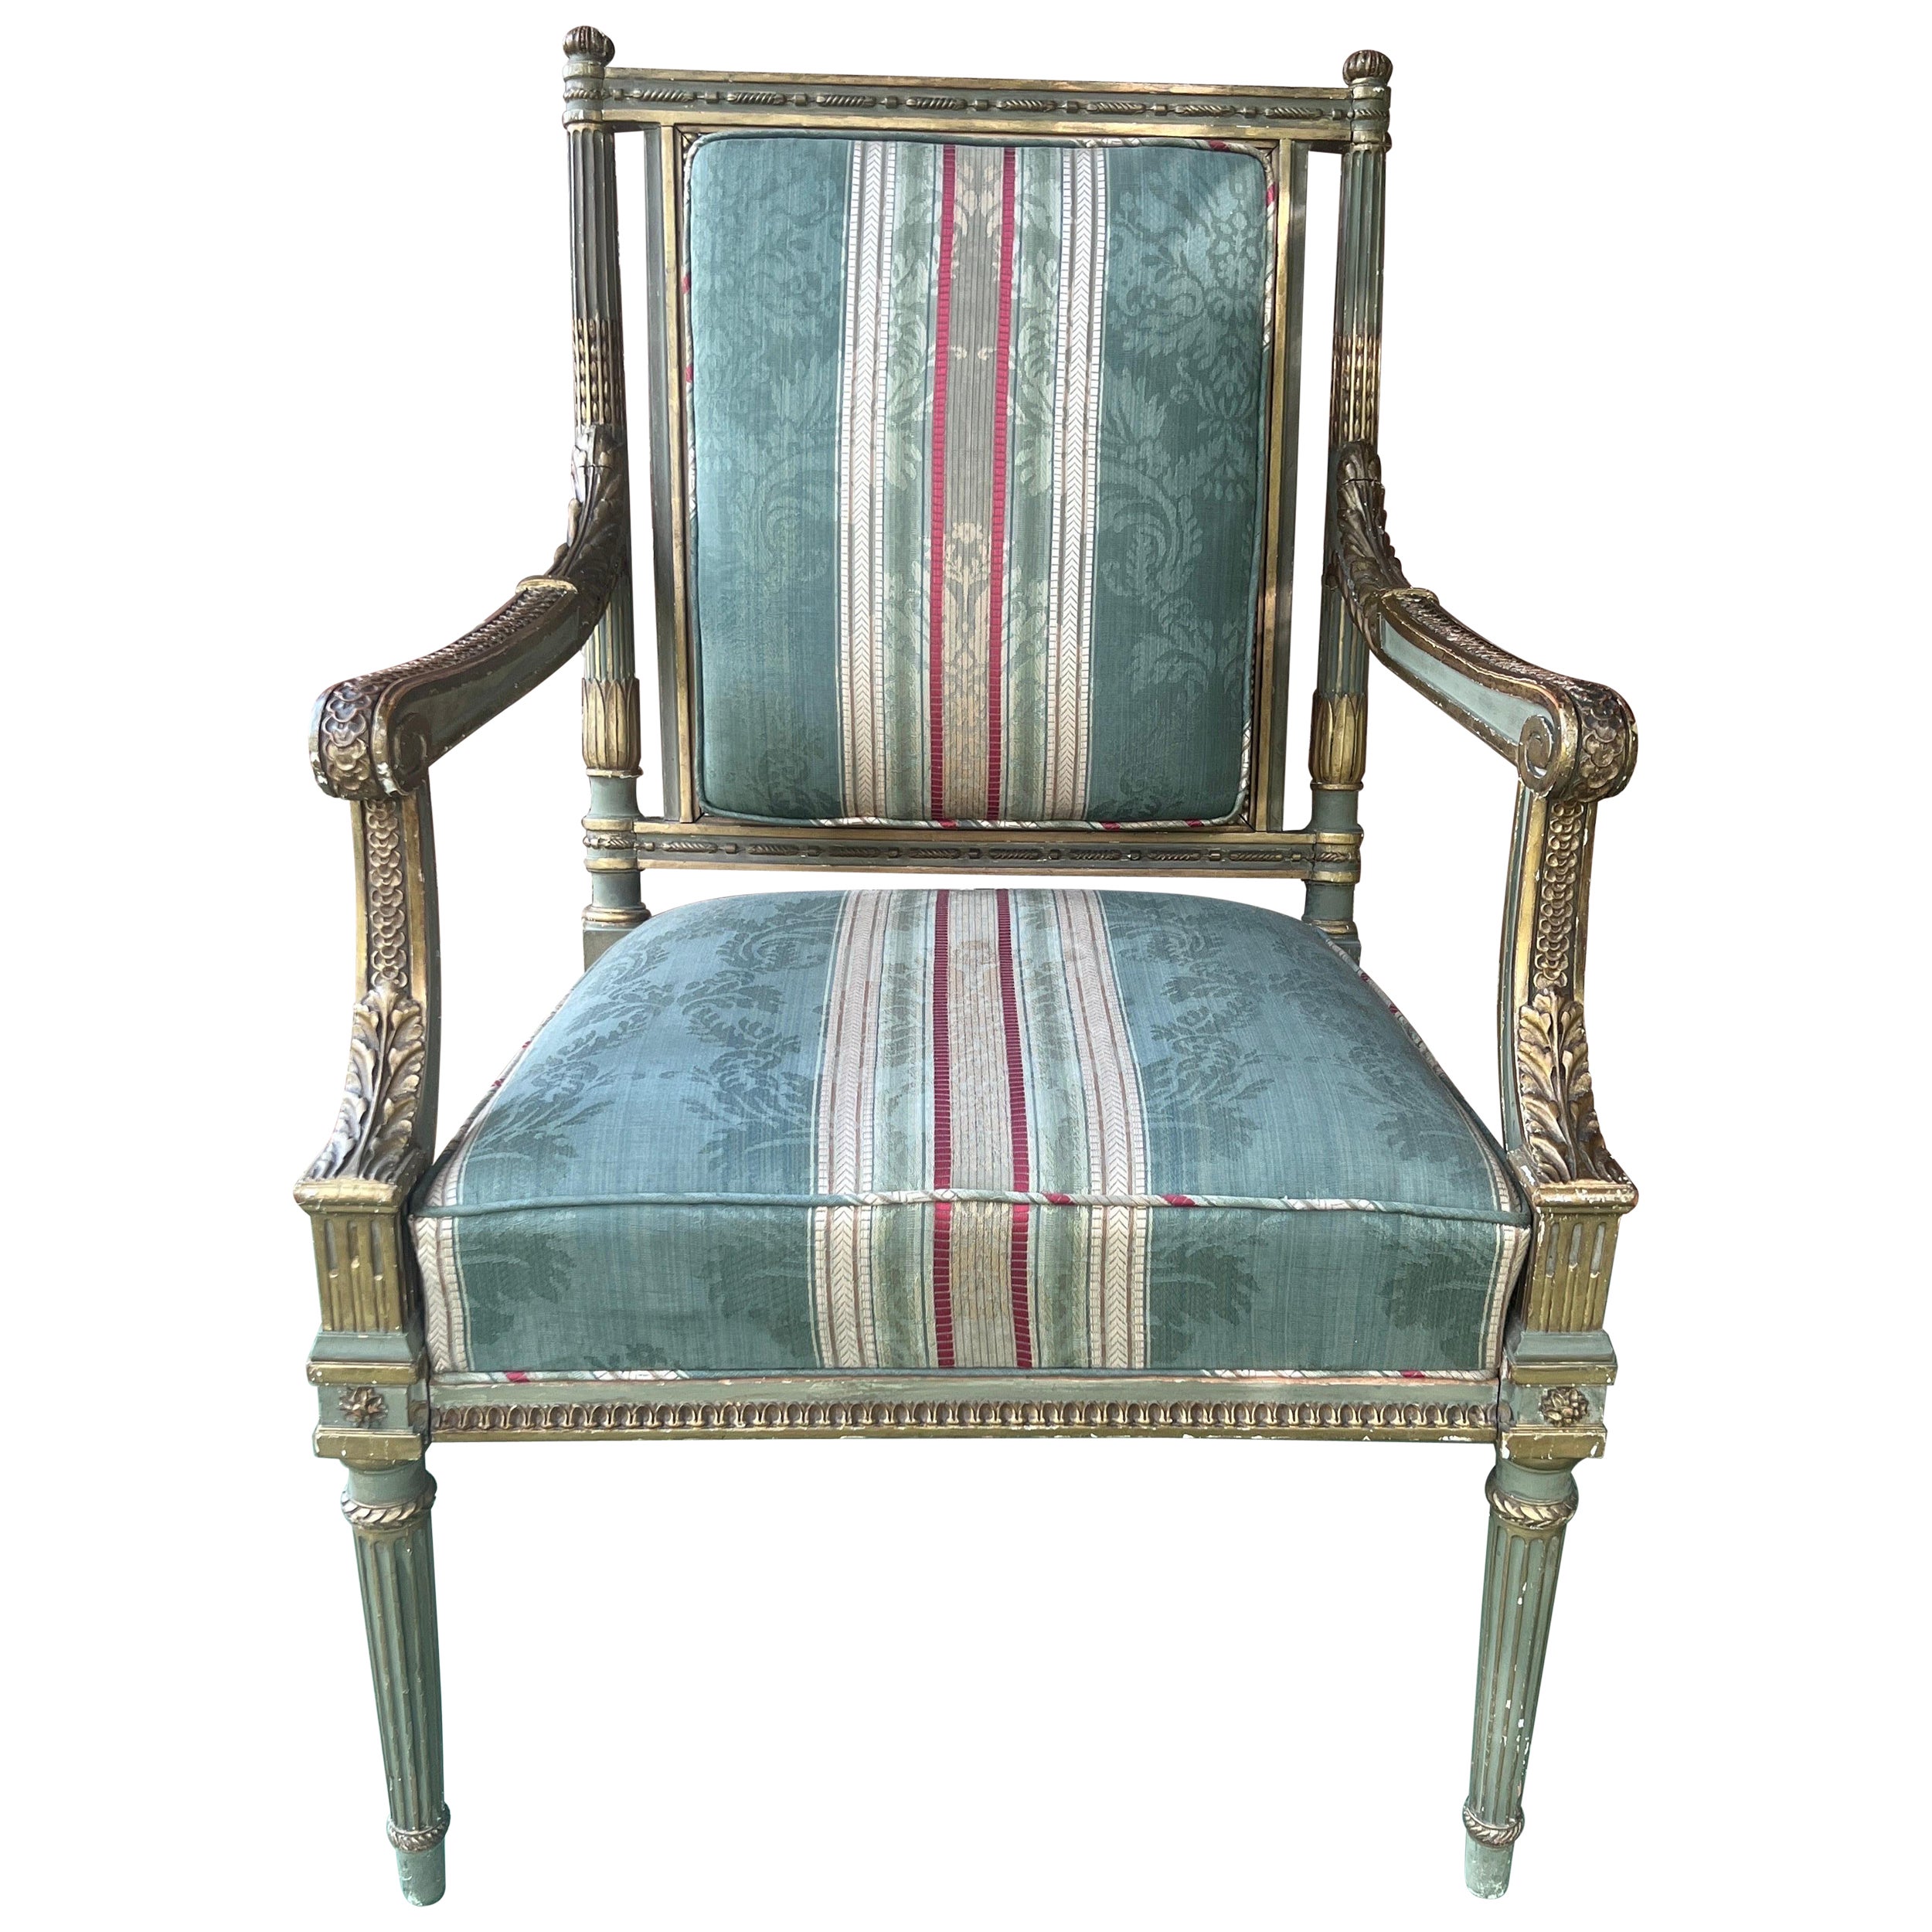 Attr: Georges Jacob (French, 1739-1814), Carved Gilt wood & Polychrome Armchair For Sale